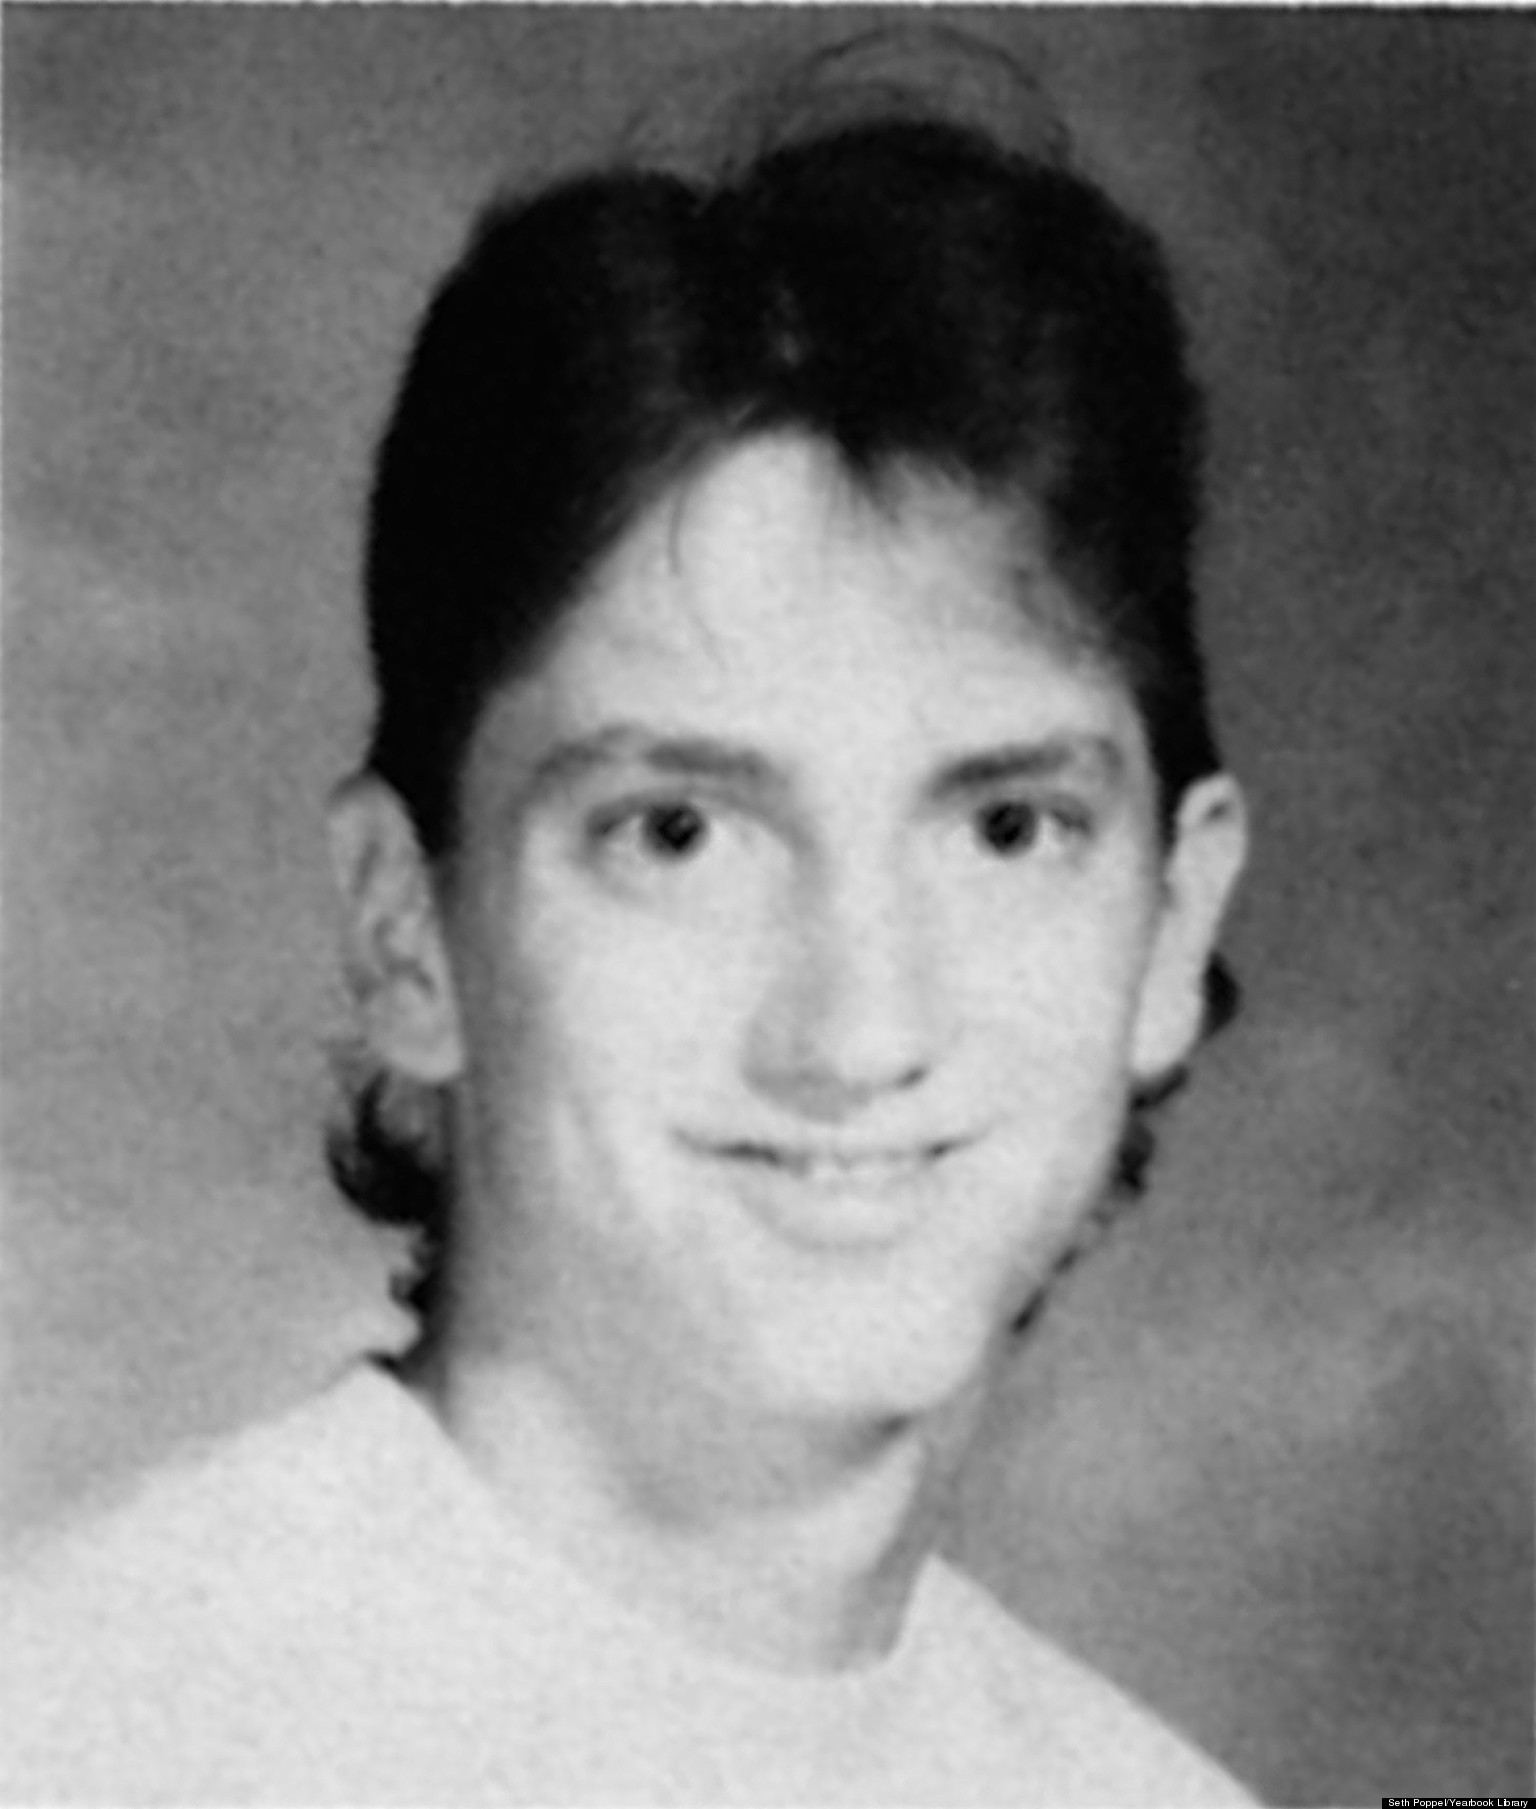 Eminem Turns 40: A Look Back At The Rapper's High School Yearbook Photo | HuffPost1536 x 1809